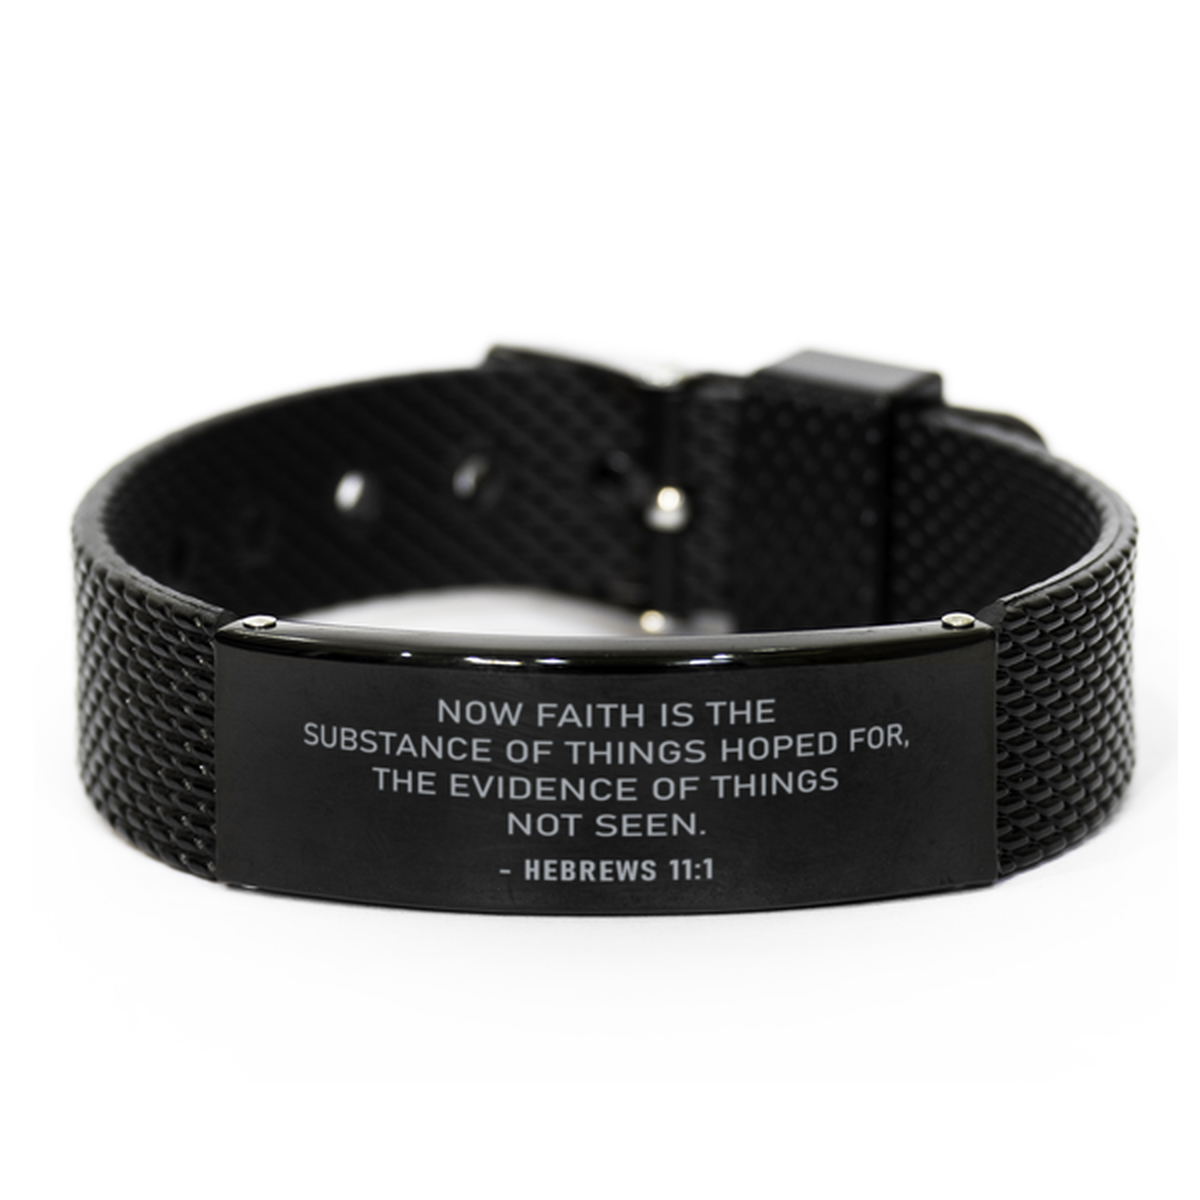 Christian Black Bracelet,, Hebrews 11:1 Now Faith Is The Substance Of Things Hoped For,, Motivational Bible Verse Gifts For Men Women